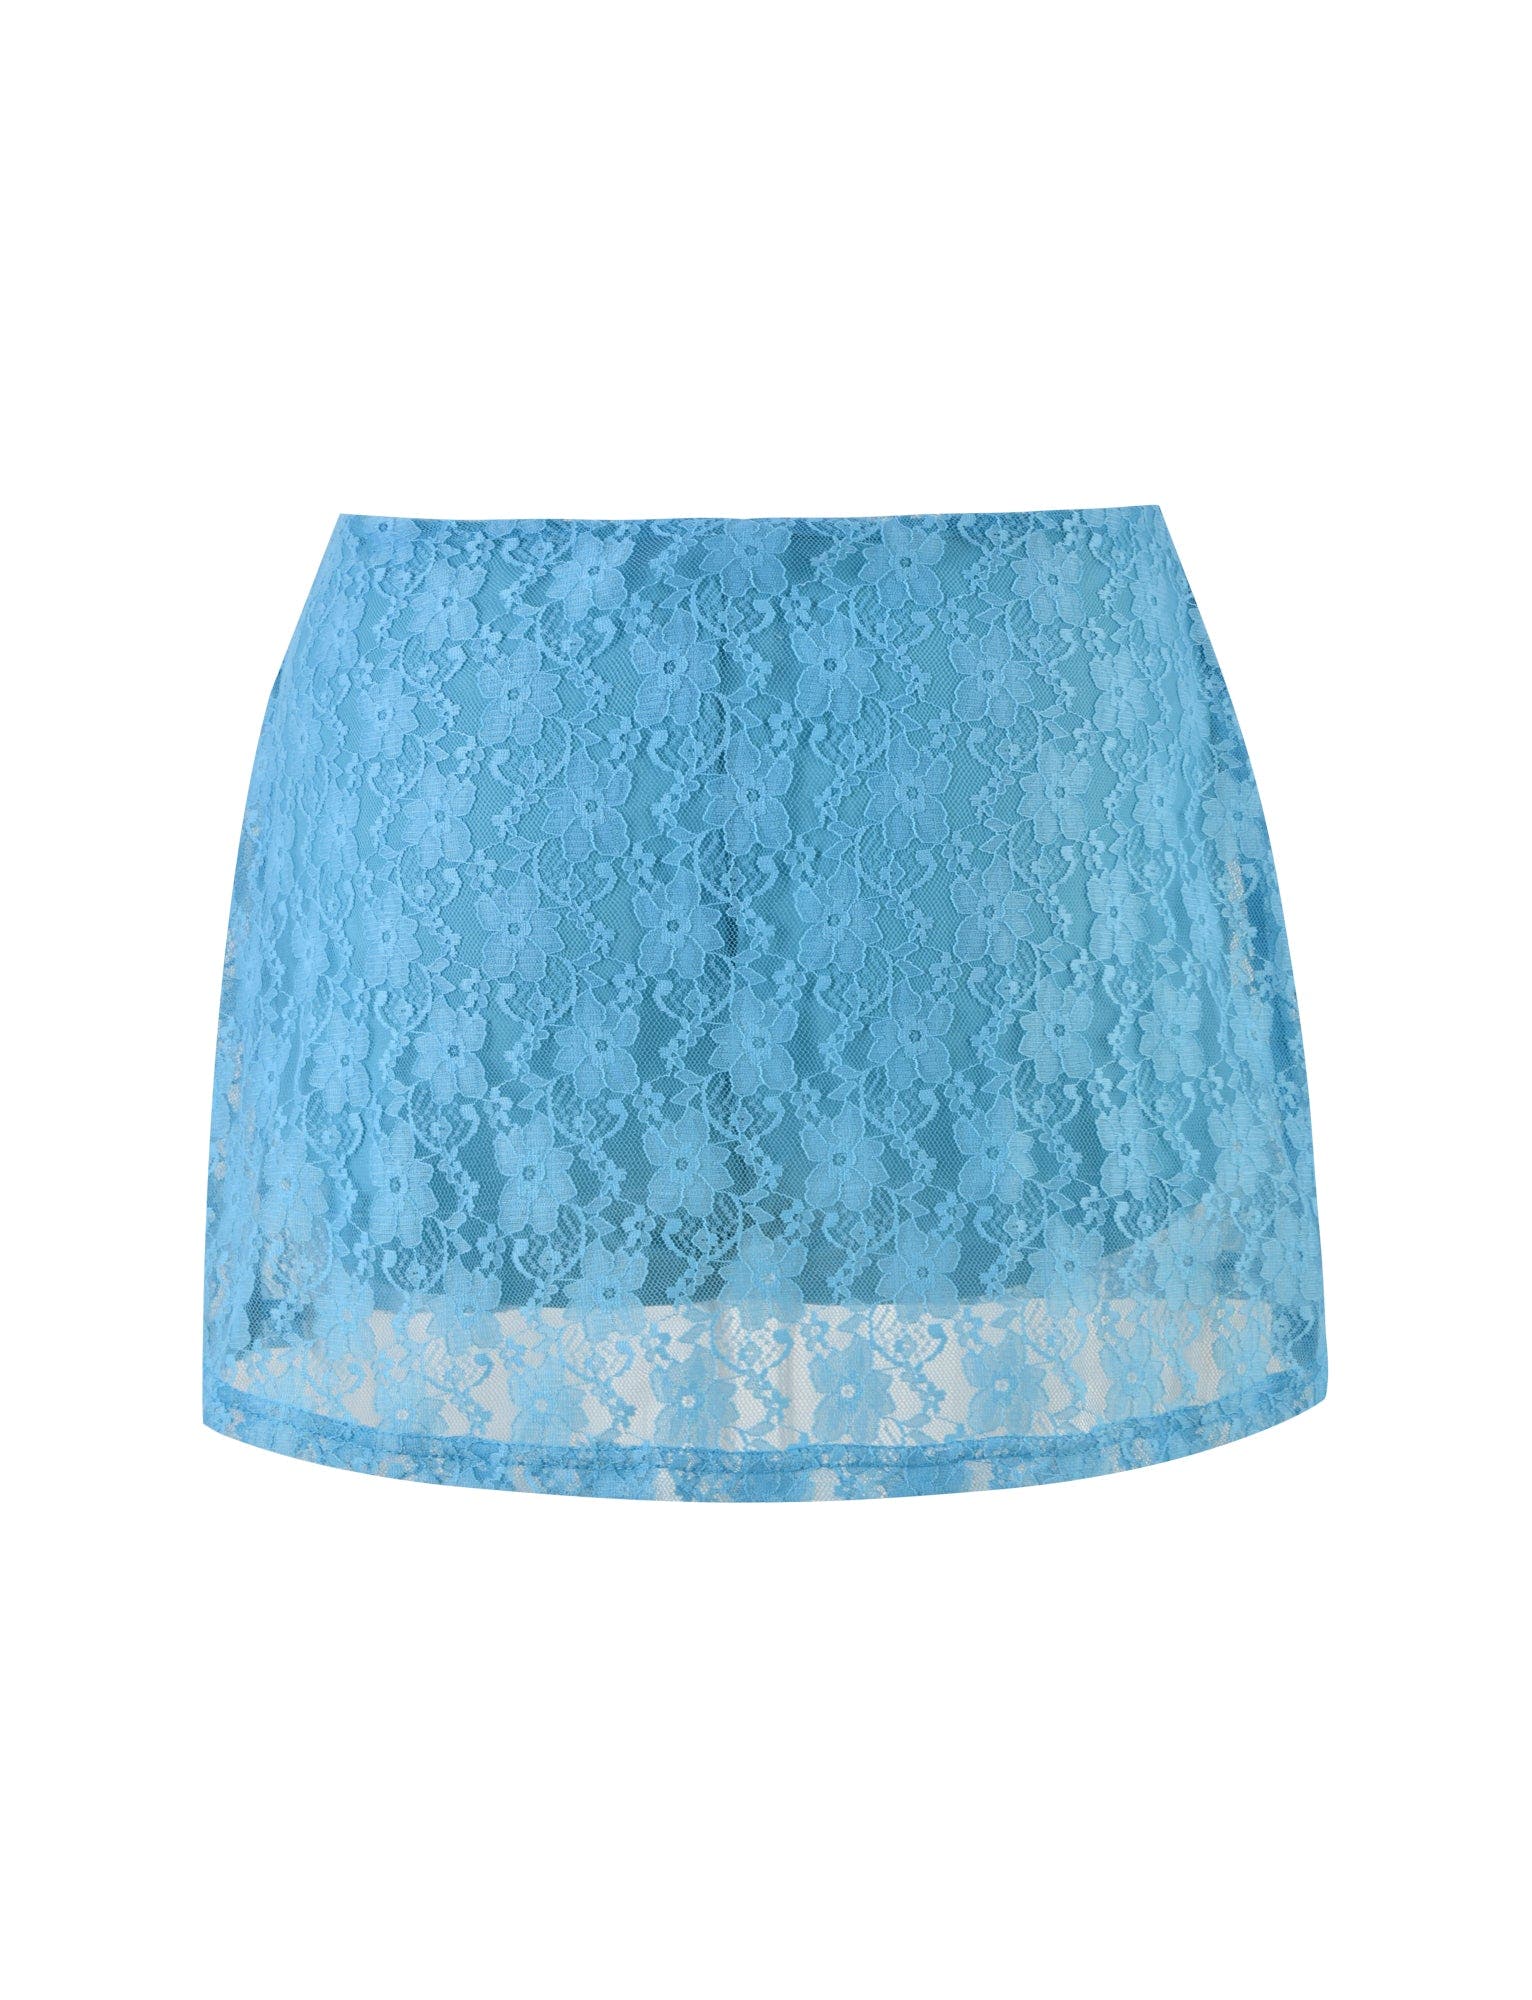 QUINLEY SKORT - BLUE : ICE BLUE : BRIGHT BLUE LACE